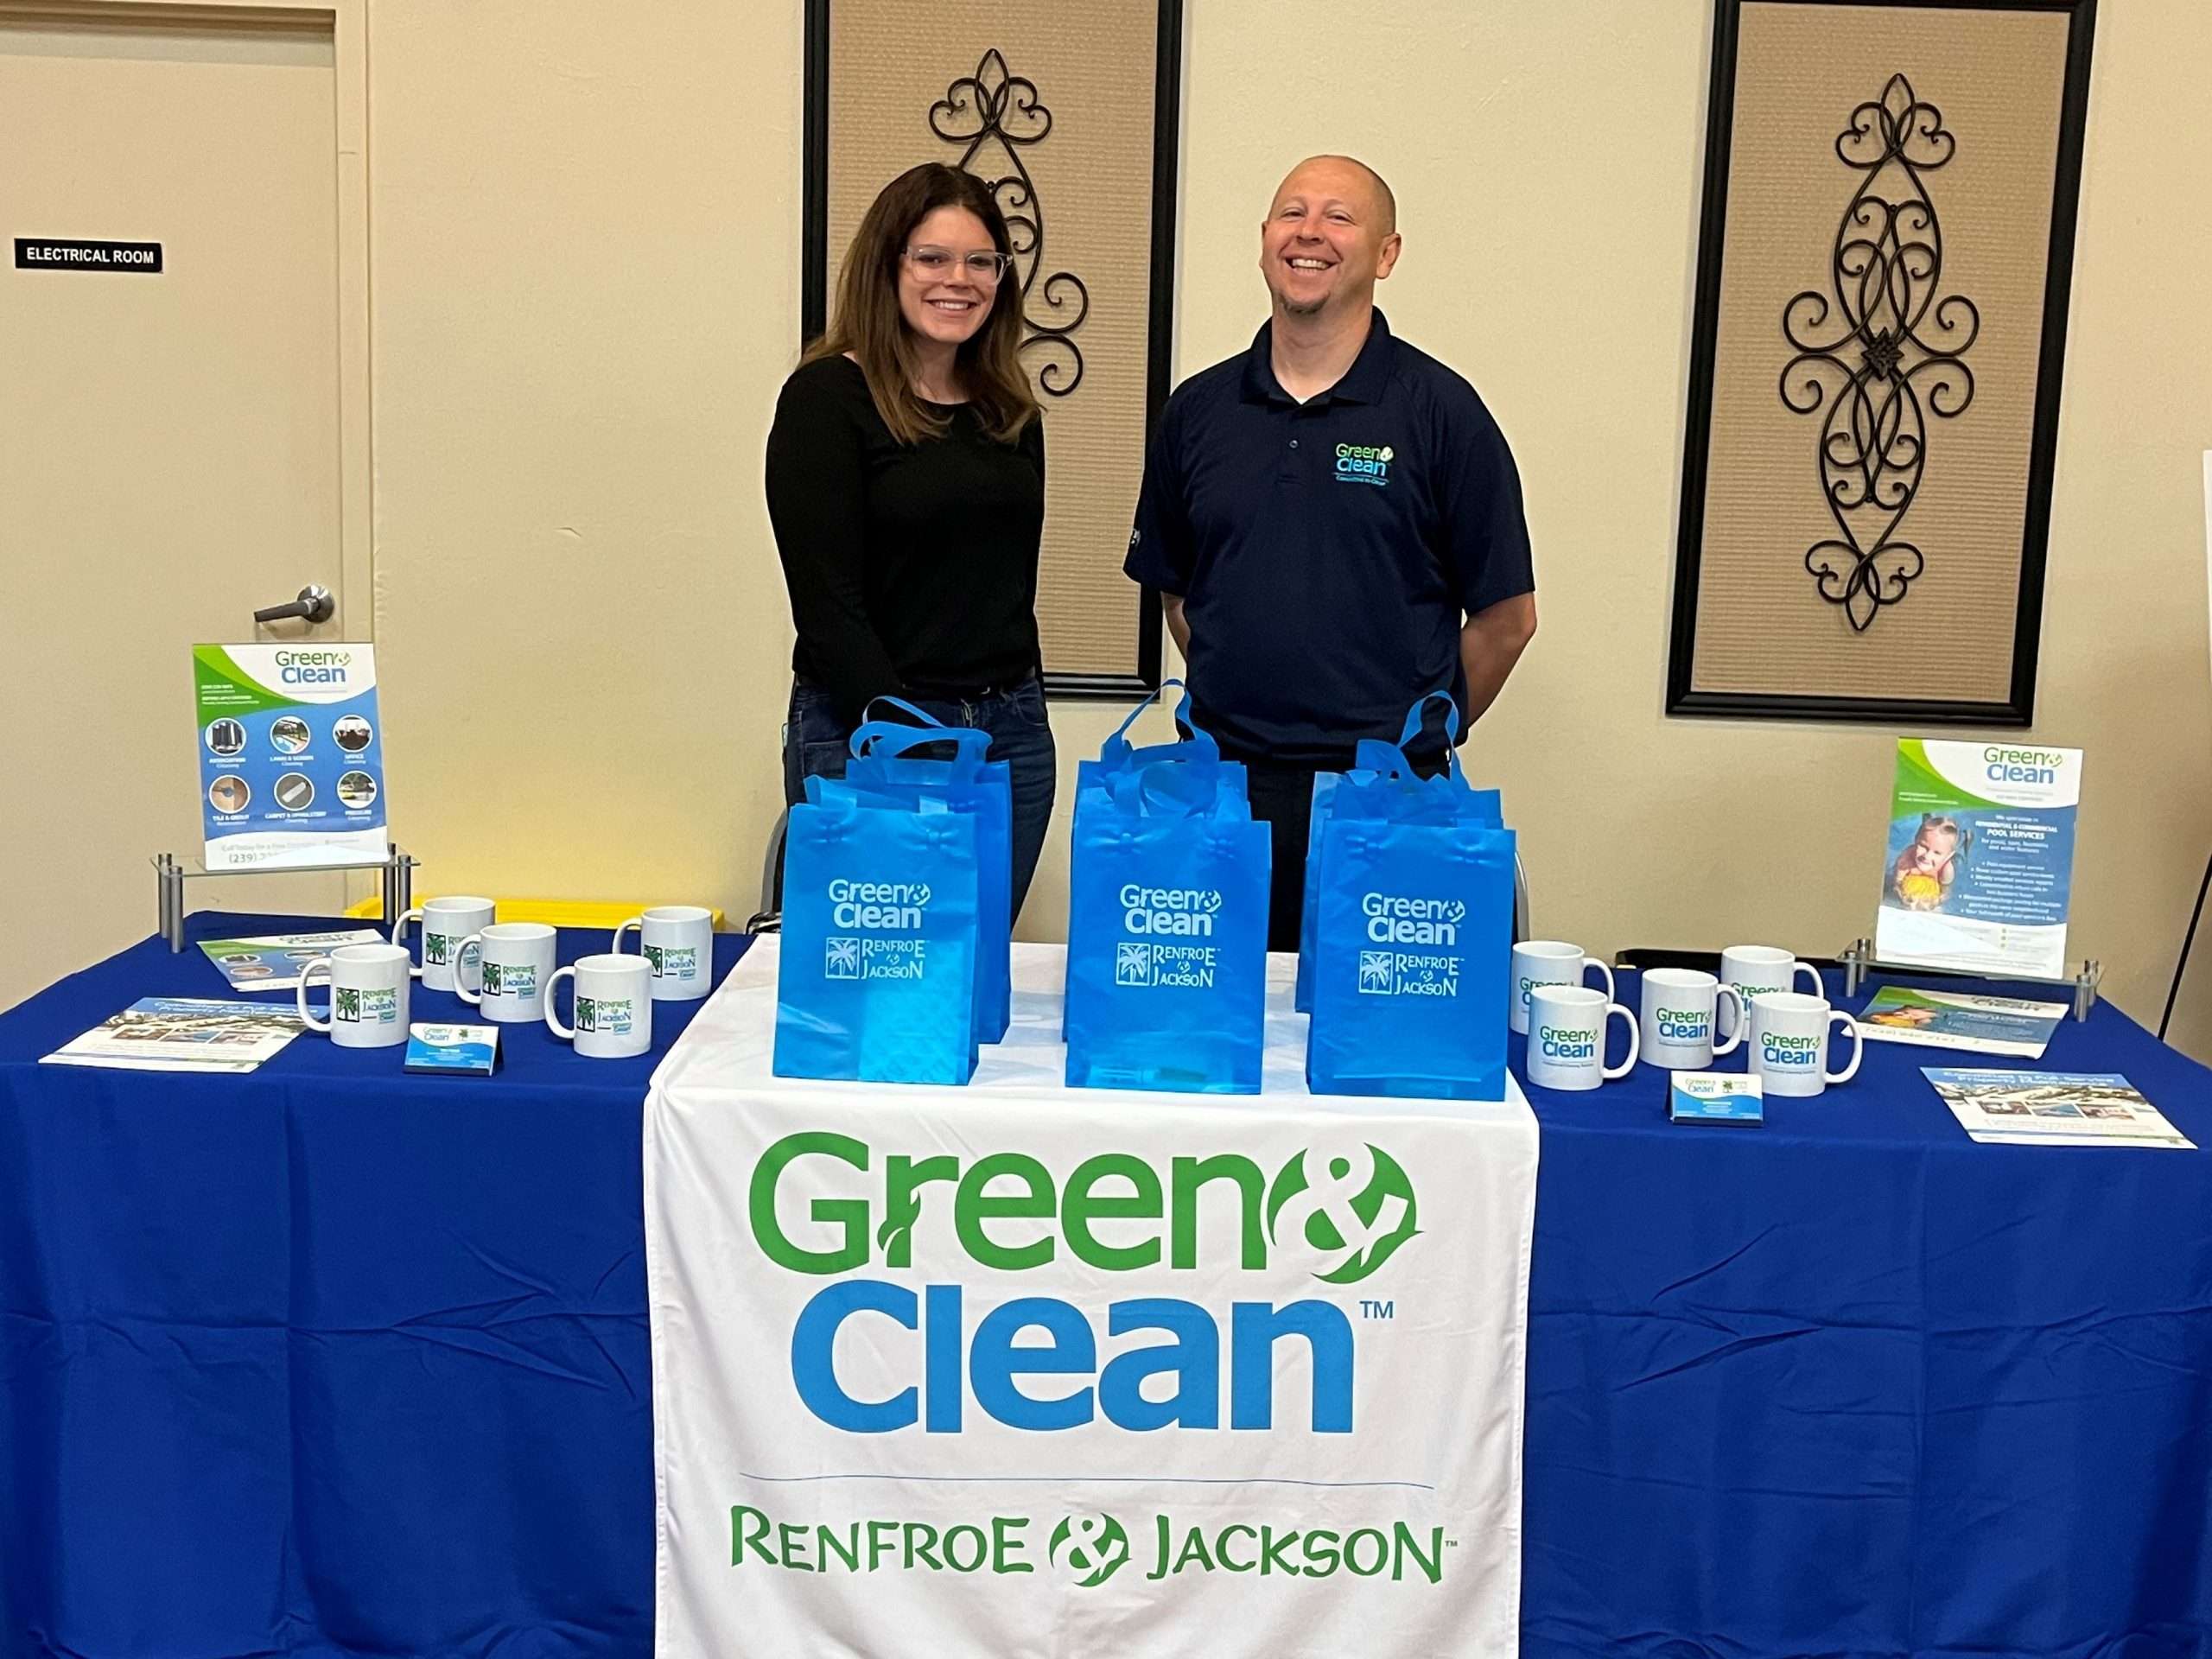 Green & Clean booth at the Gulf Breeze expo